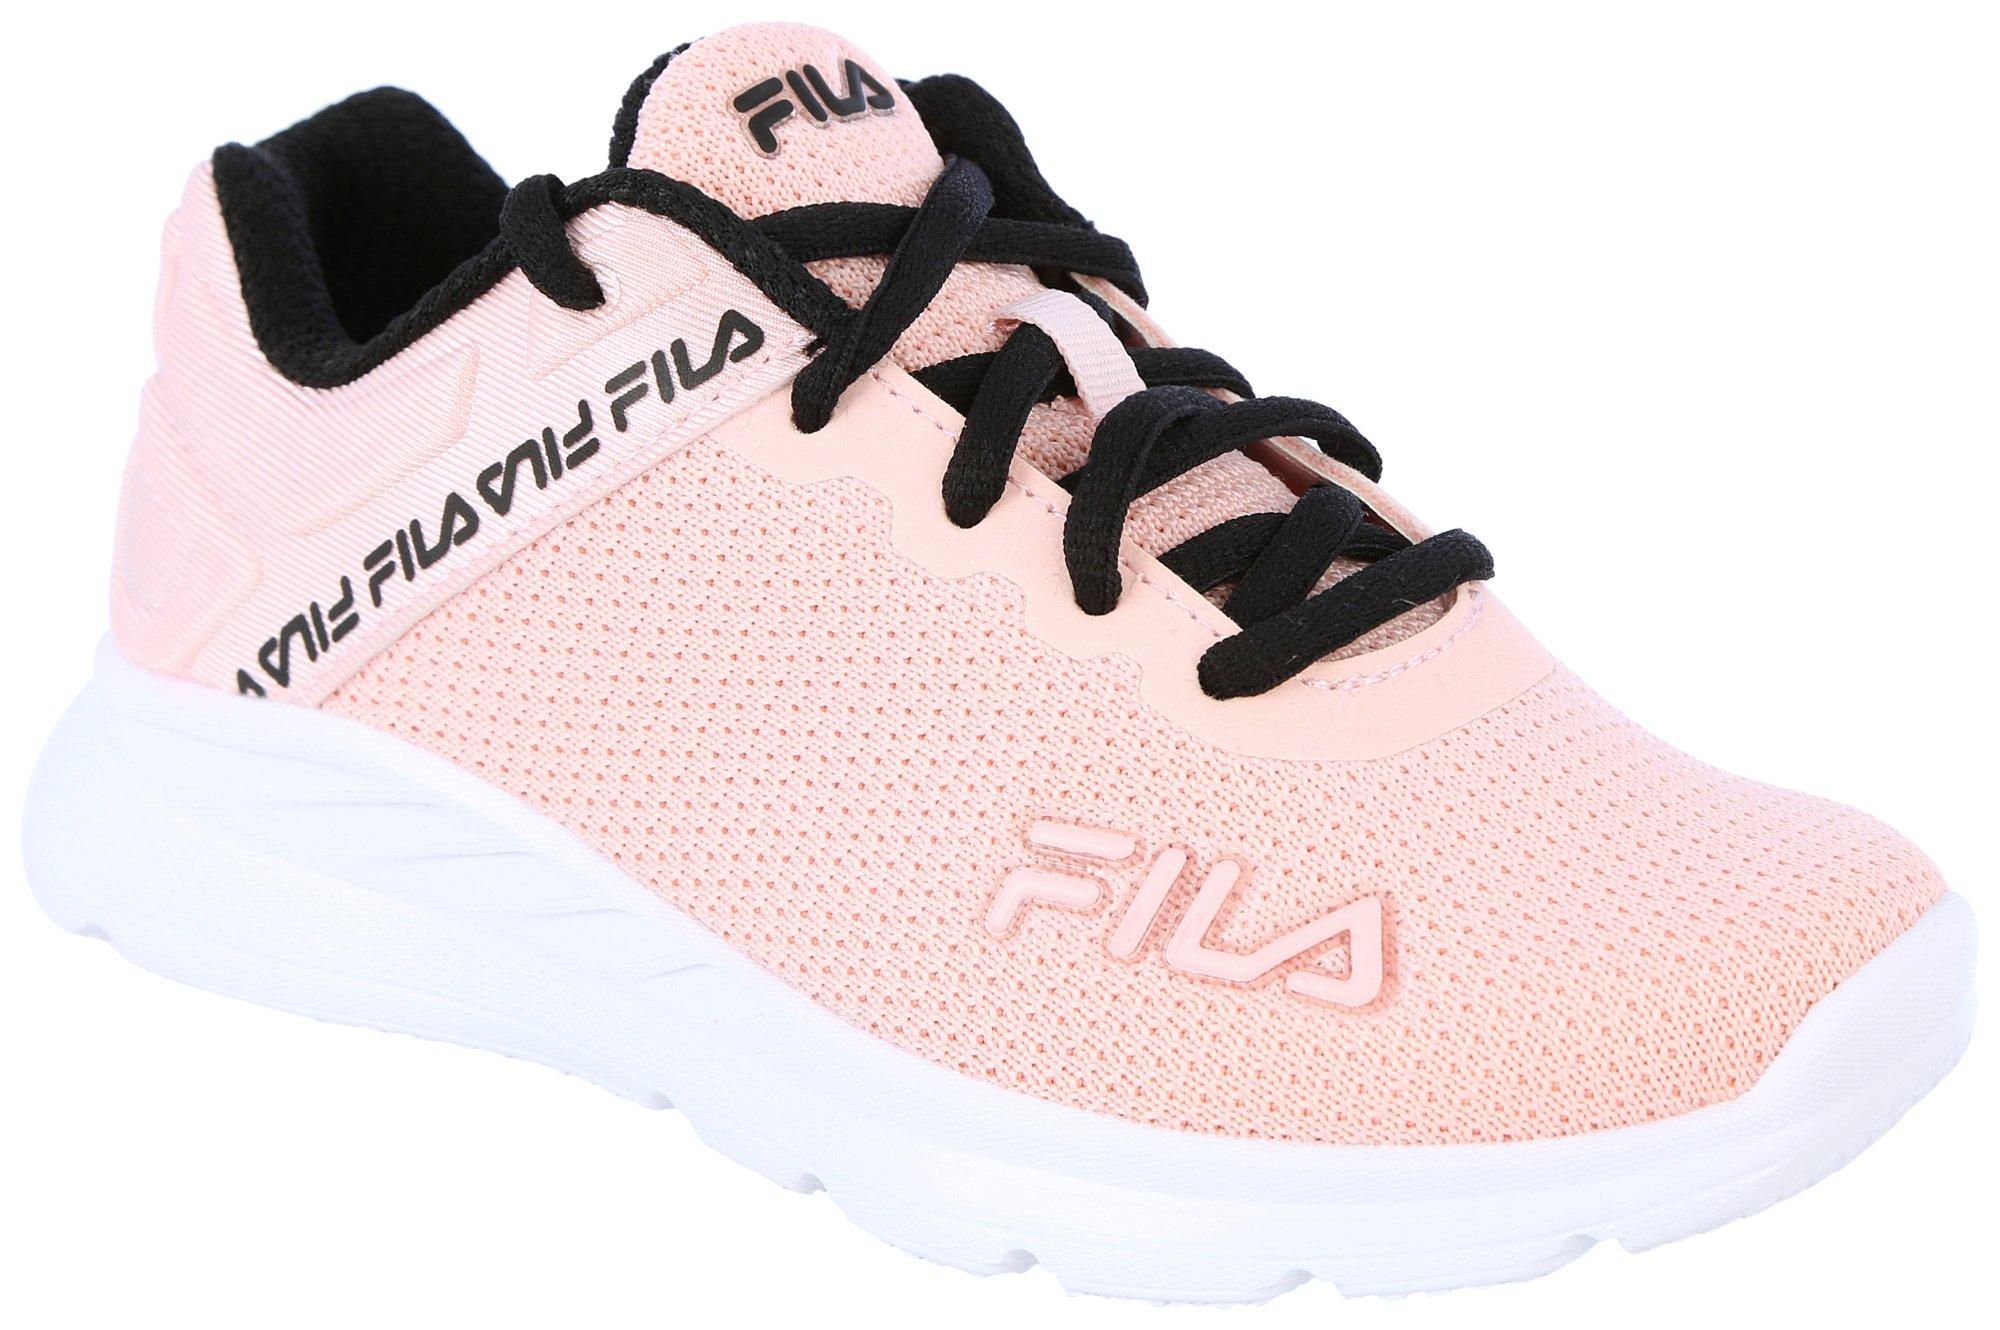 Fila Girls Lightspin Athletic Shoes